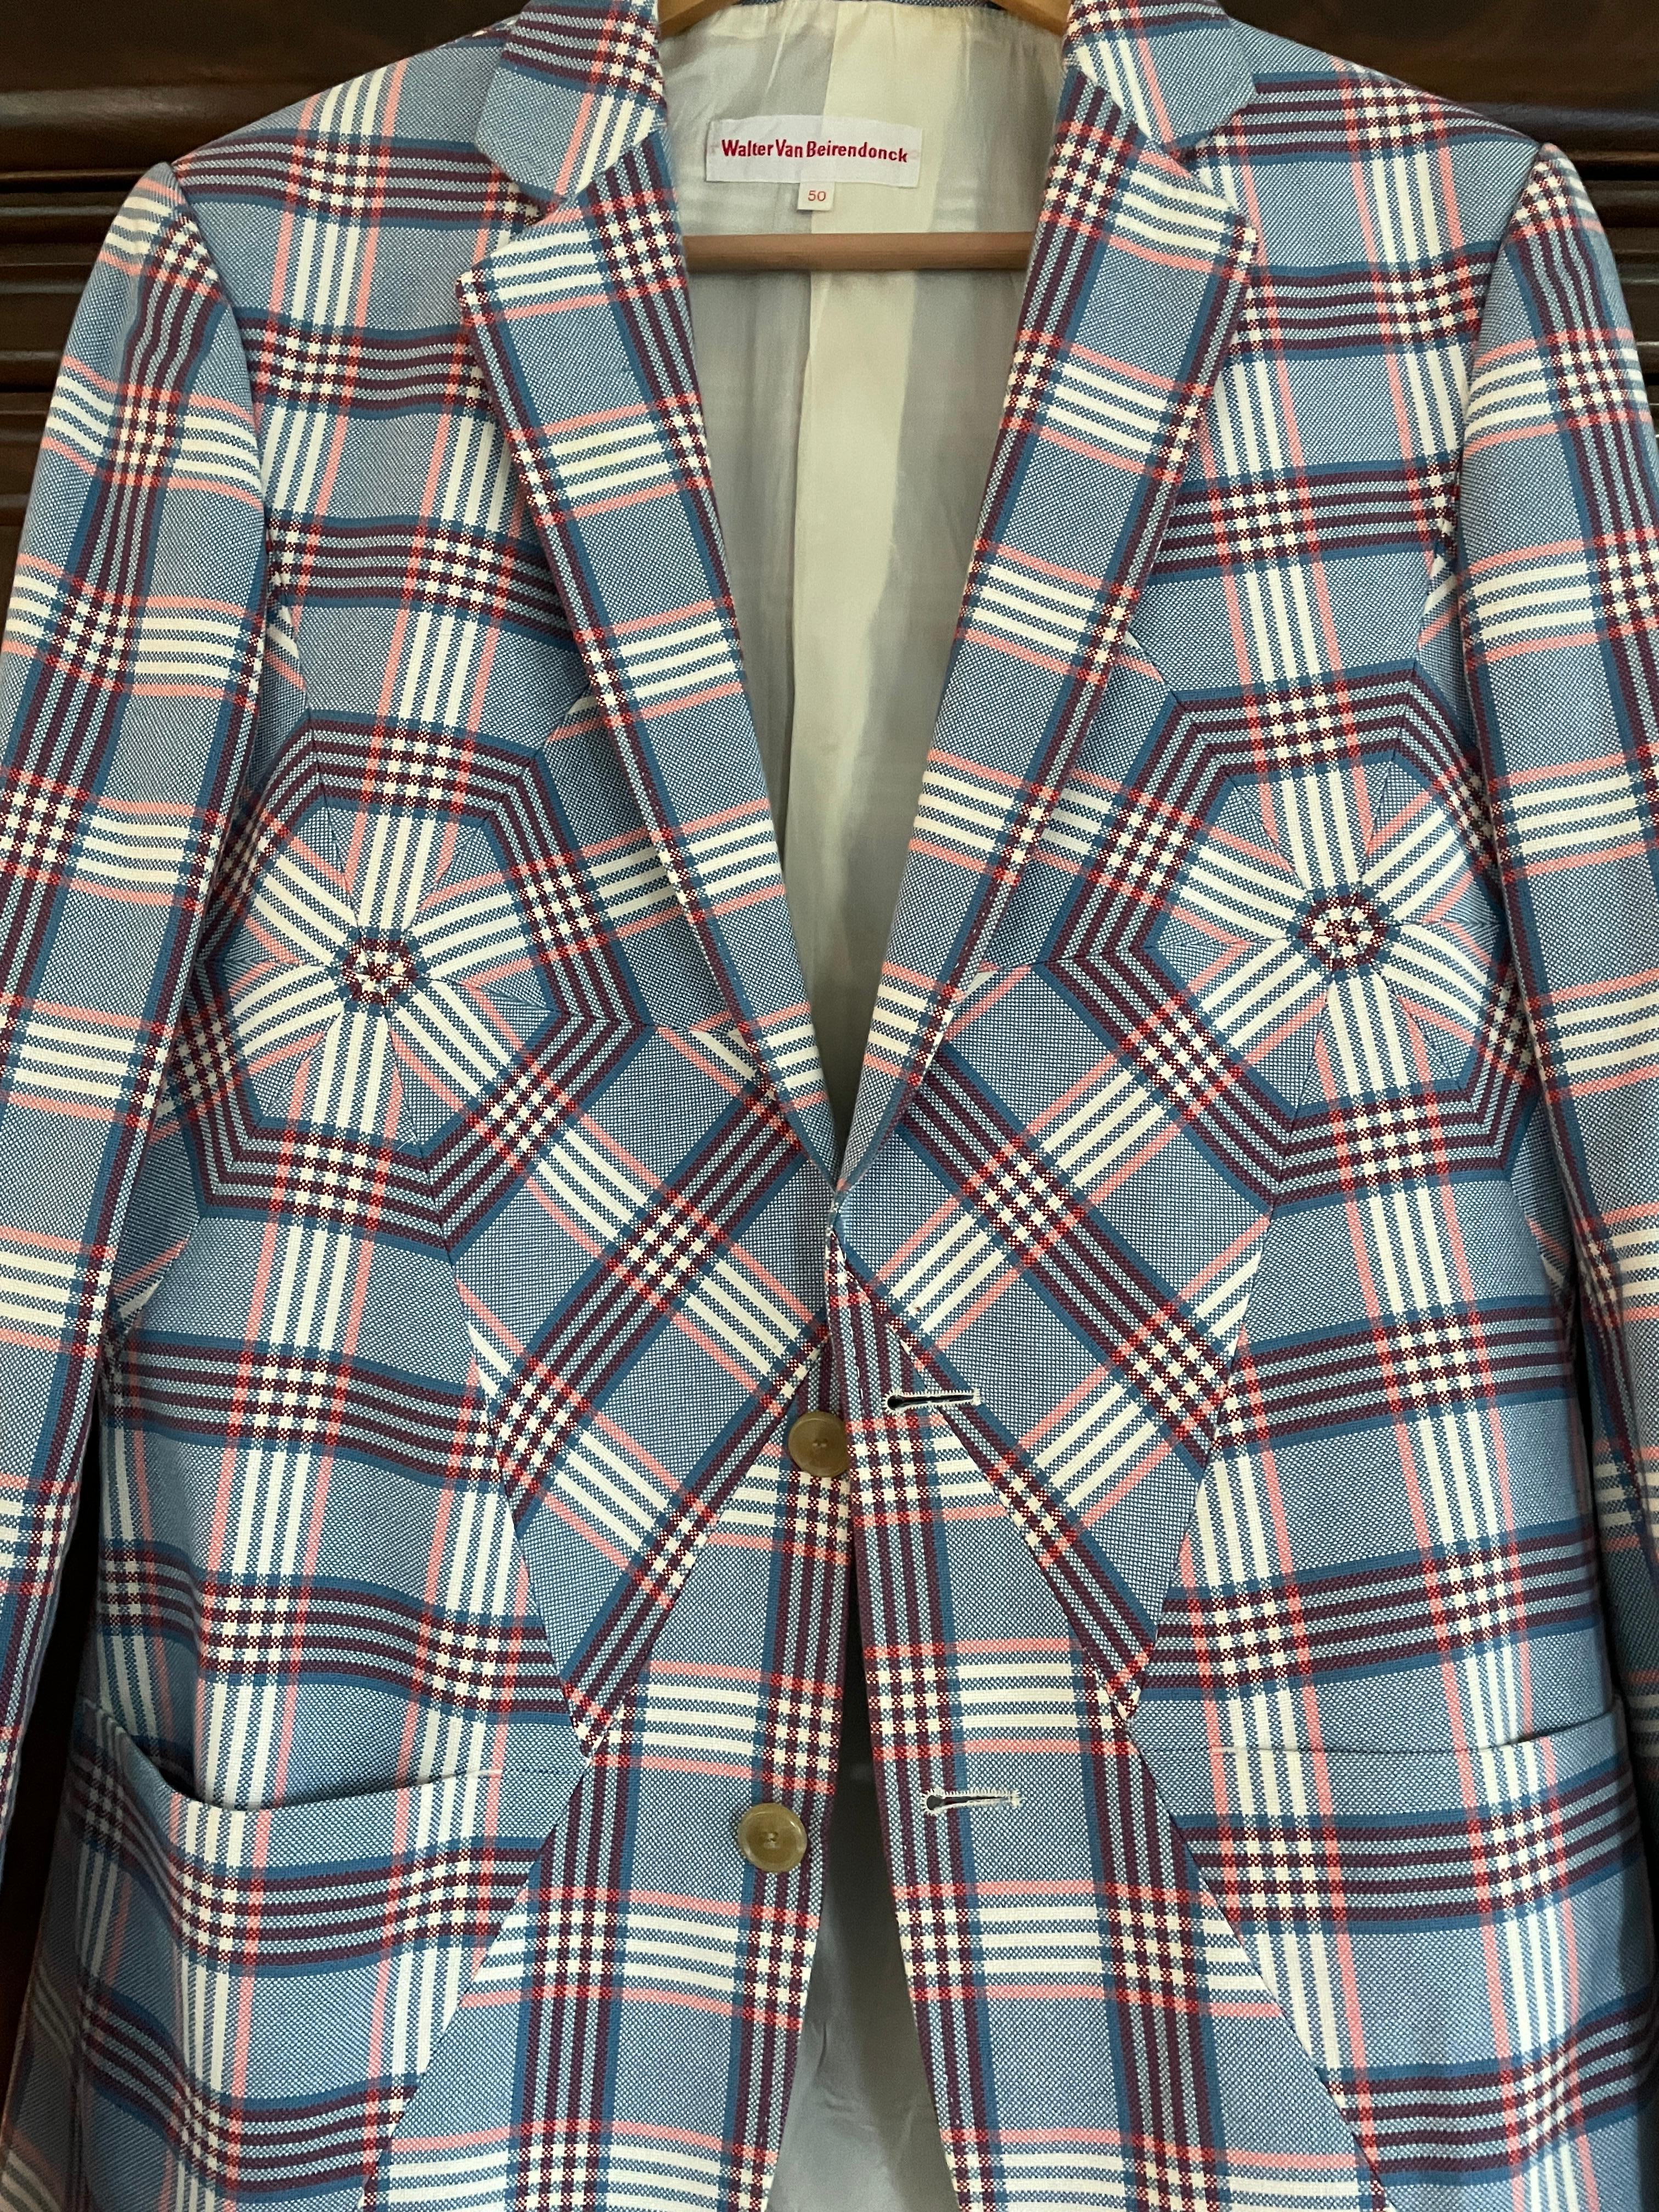 Walter van Beirendonck Men's Plaid Suit . Jacket and Pants
I was photographed in this at the CFDA Awards by Bill Cunningham and Featured in the NYTimes Sunday Styles wearing it.
I'll add the Style section photo as soon as I find it.
Sadly , I will